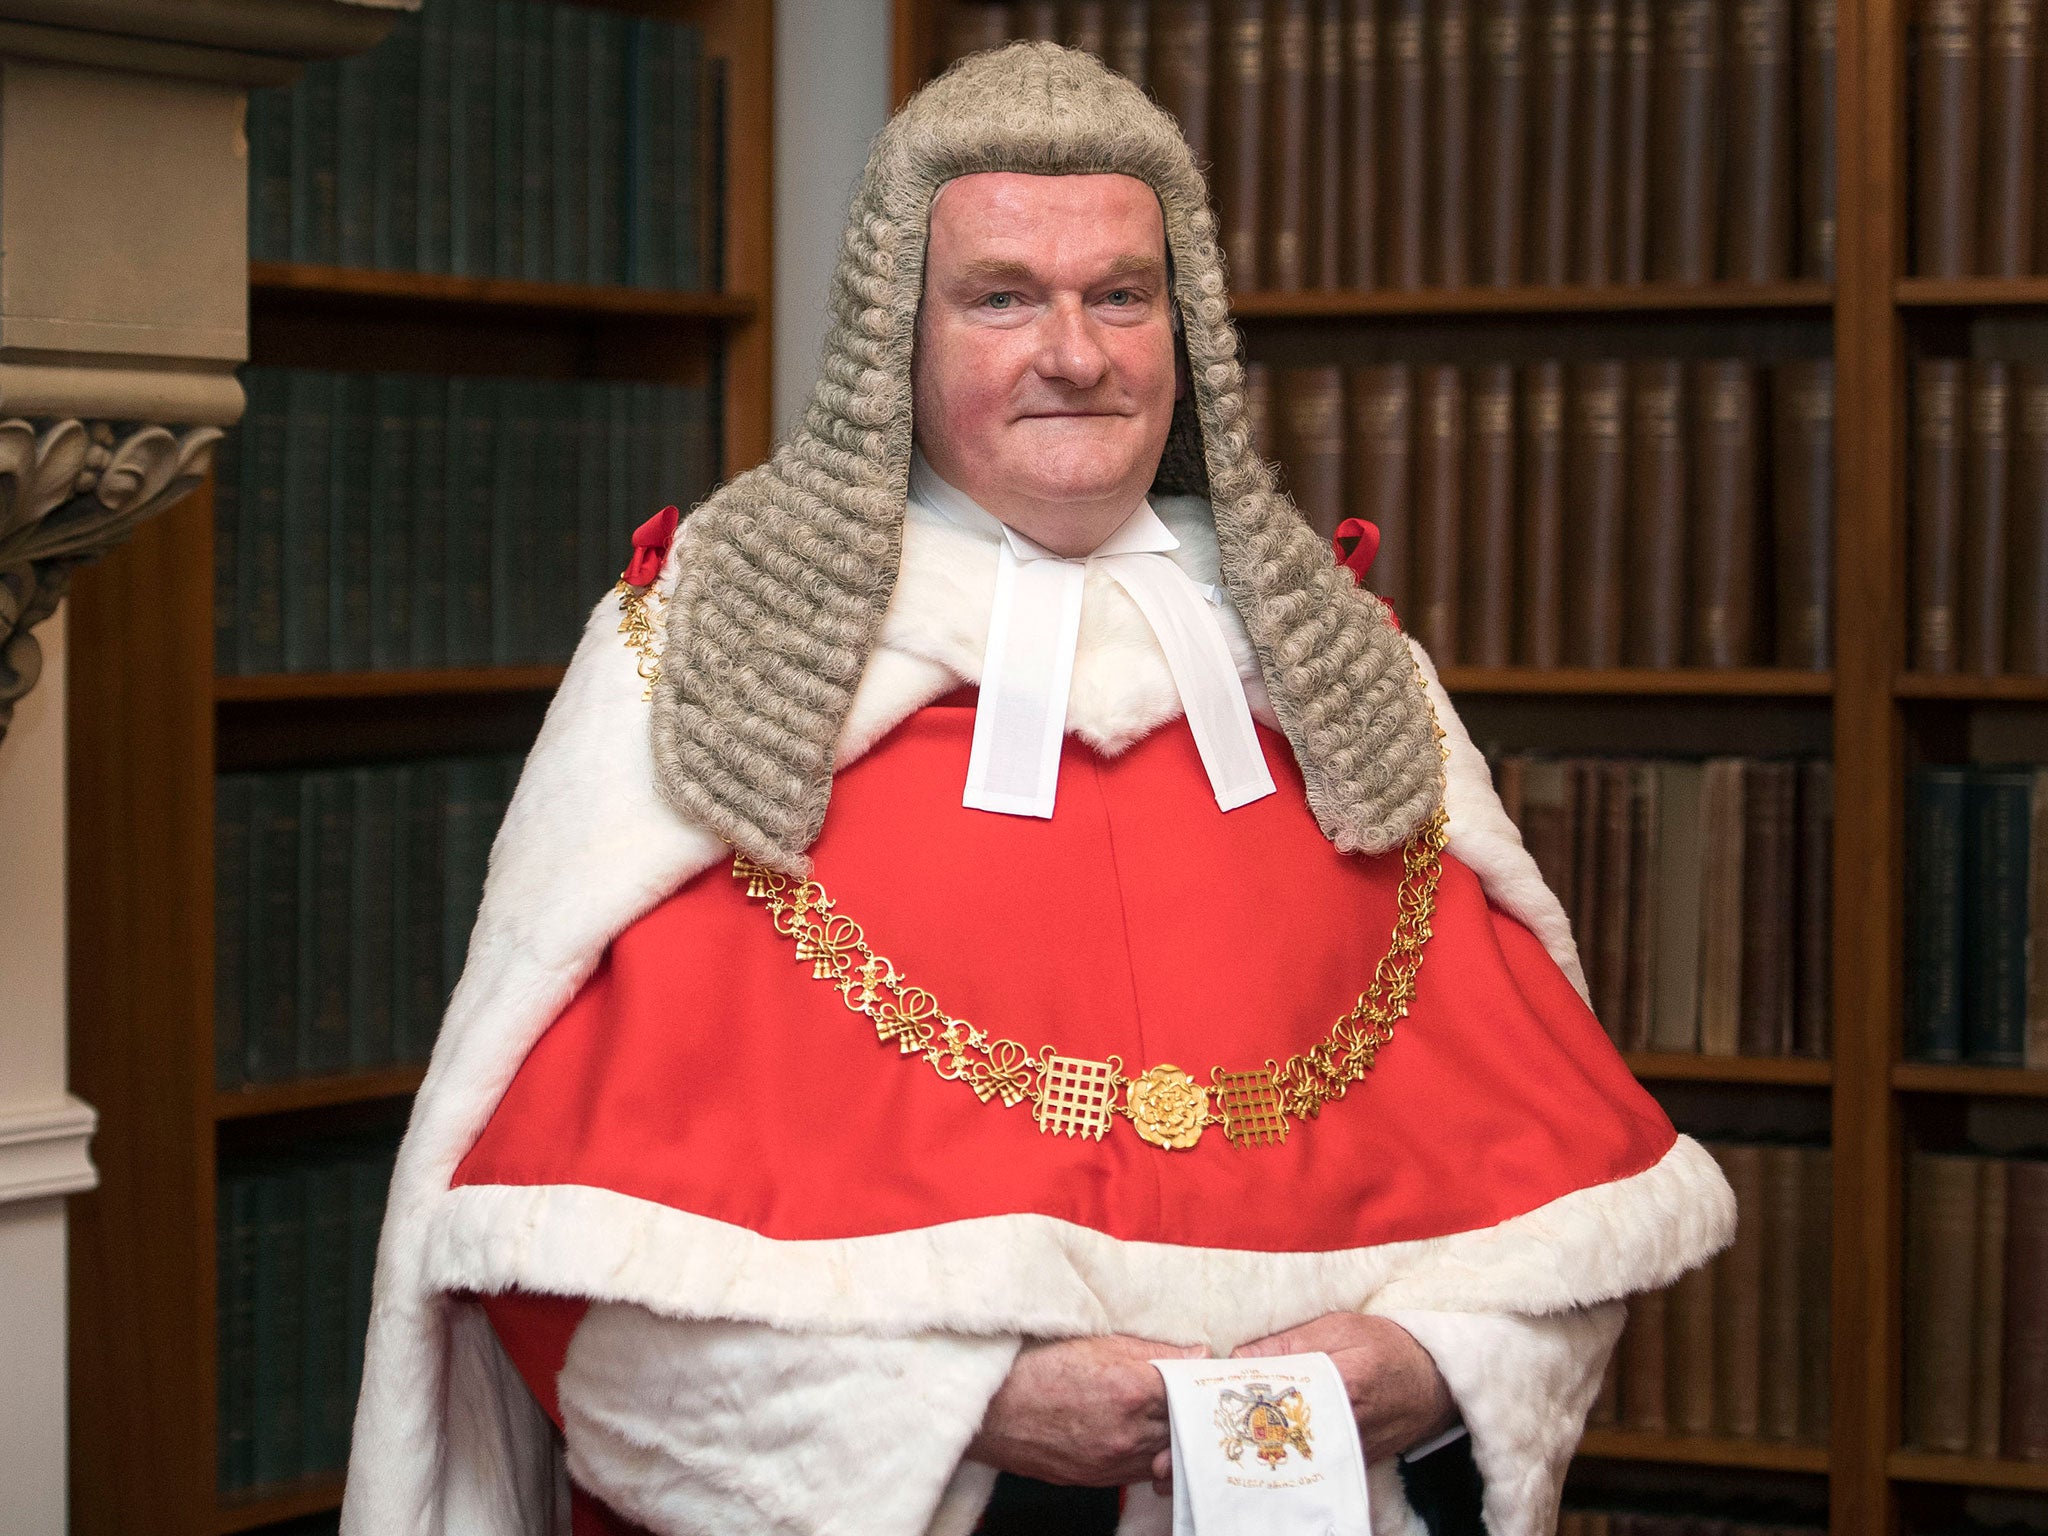 The new Lord Chief Justice, Sir Ian Burnett, at the Royal Courts of Justice